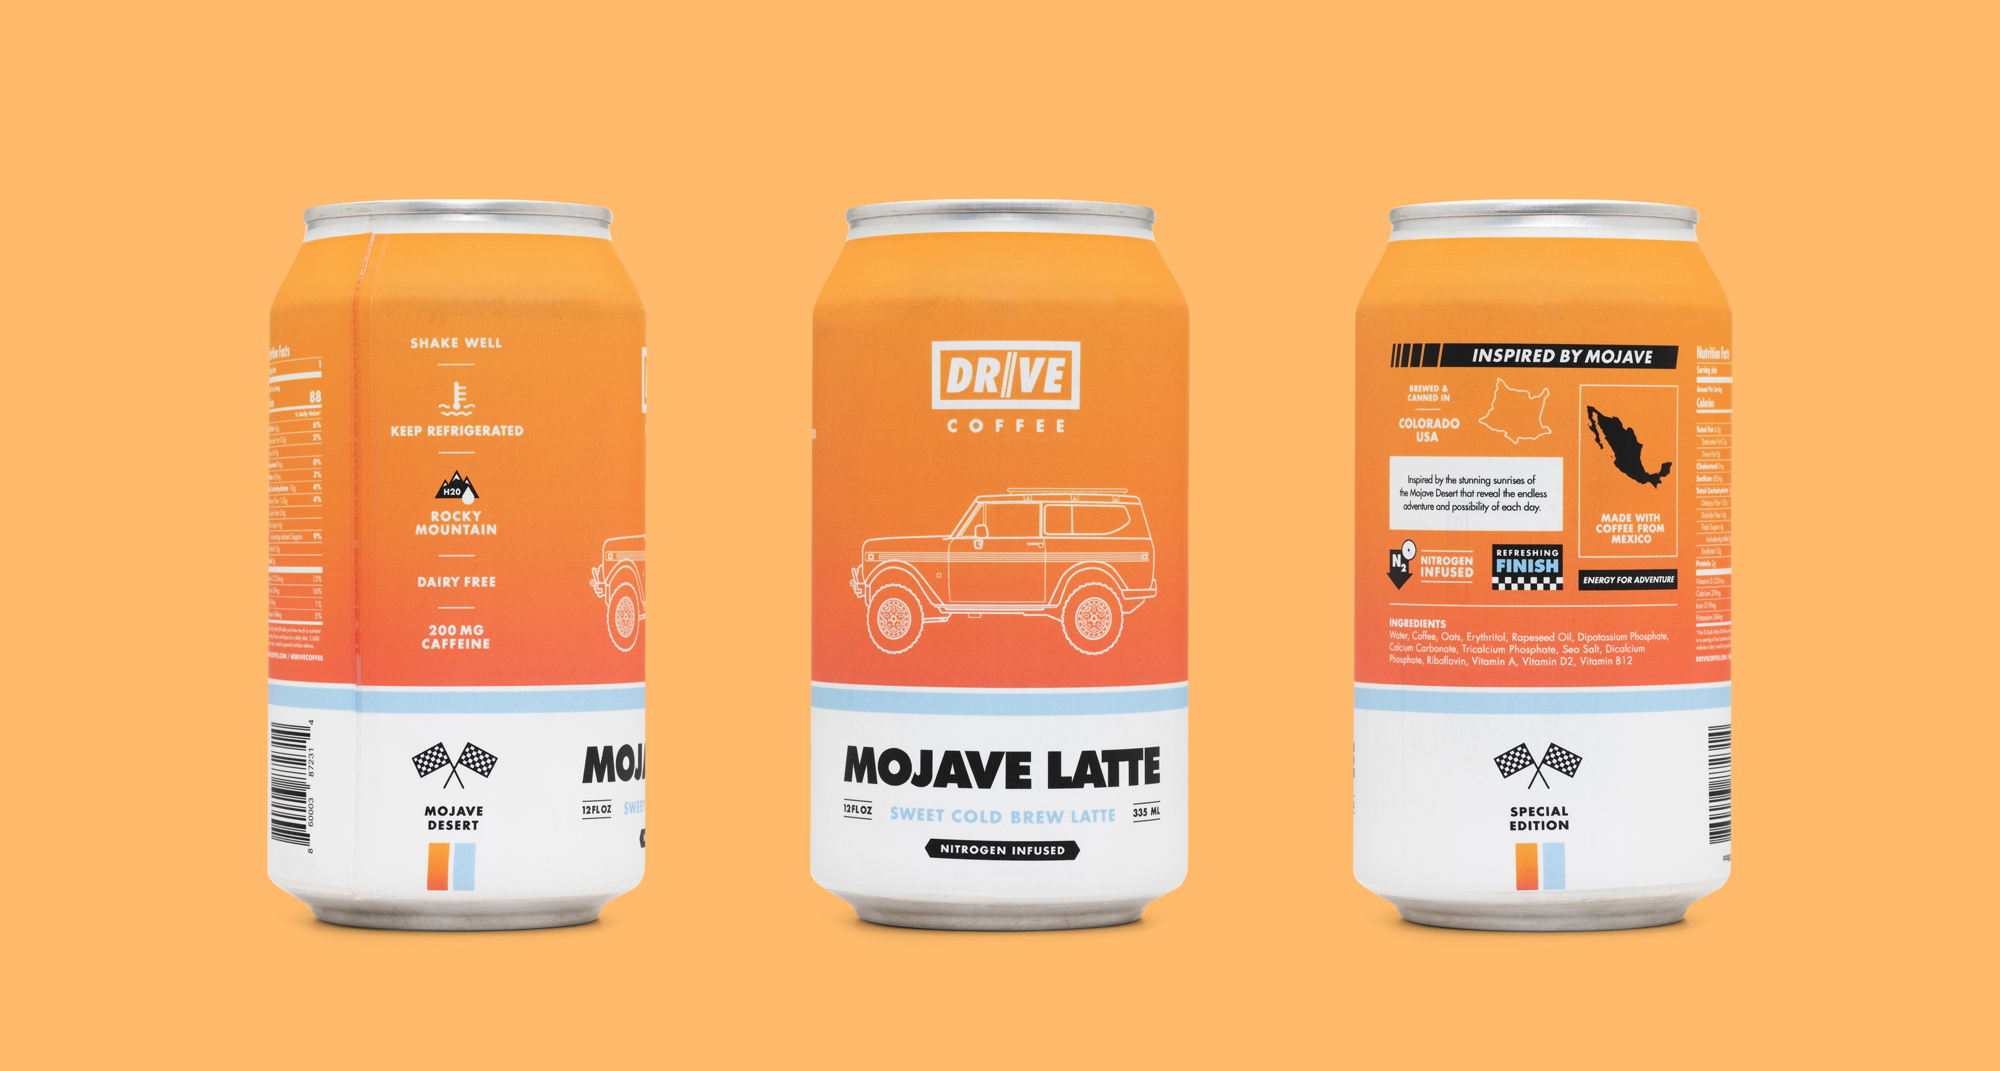 3 views of Drive Coffee's Mojave Latte cold brew can label on an orange background